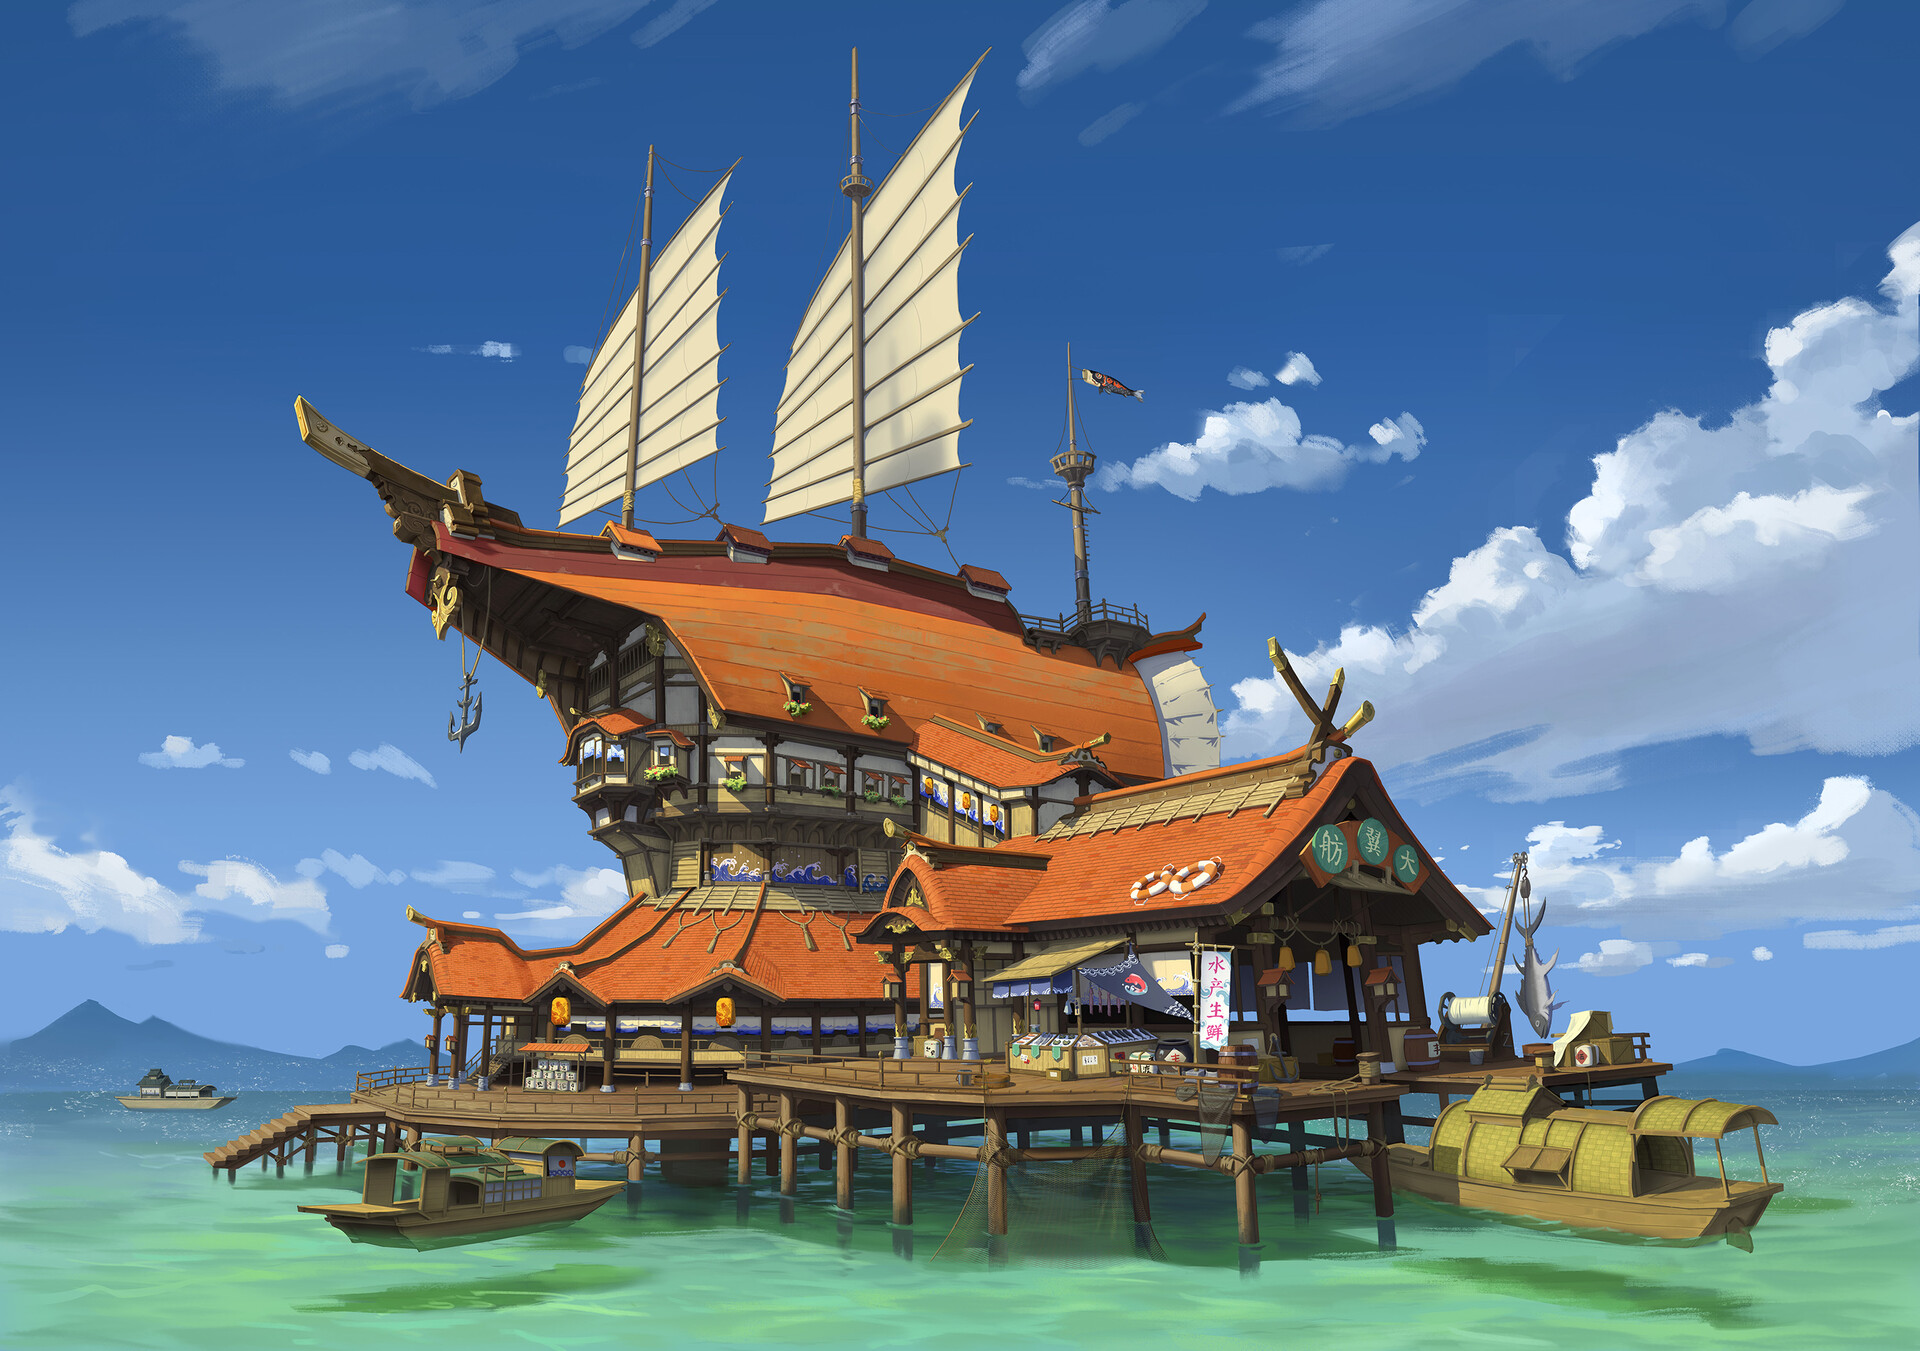 General 1920x1351 drawing house boat water pier banner fish fish hooks sky clouds digital art